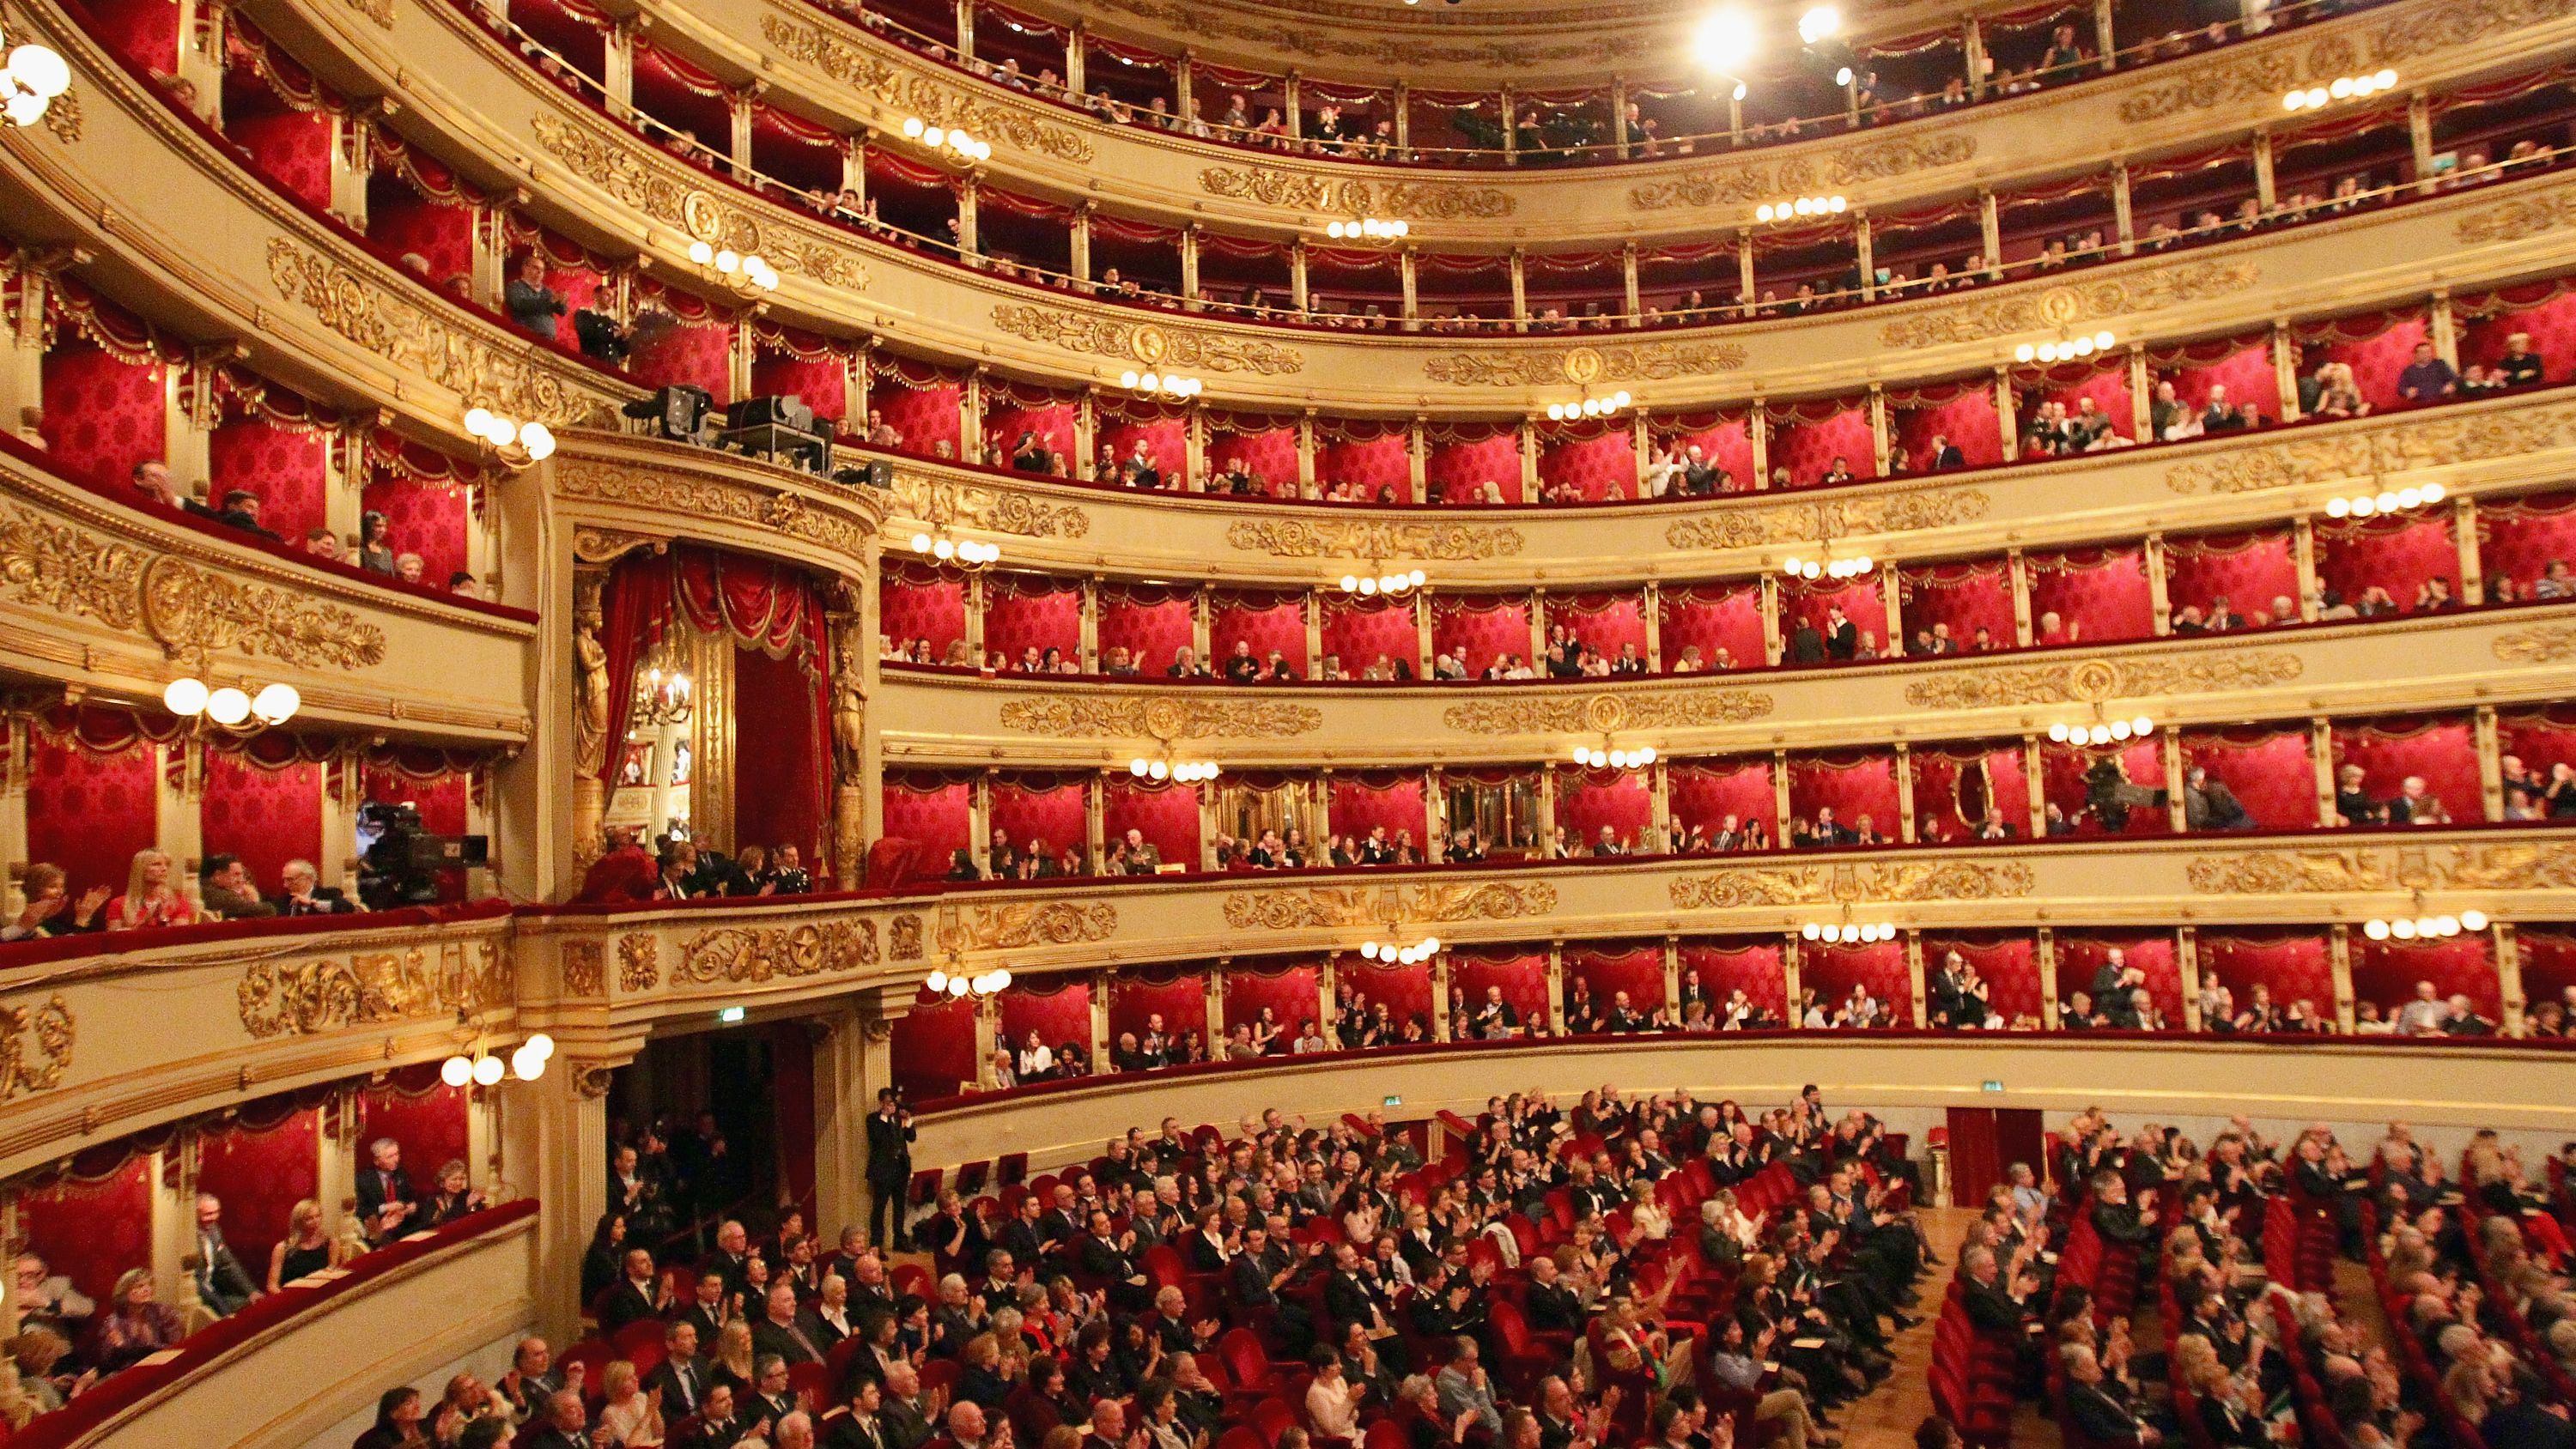 La Scala is one of the world's most renowned opera houses.